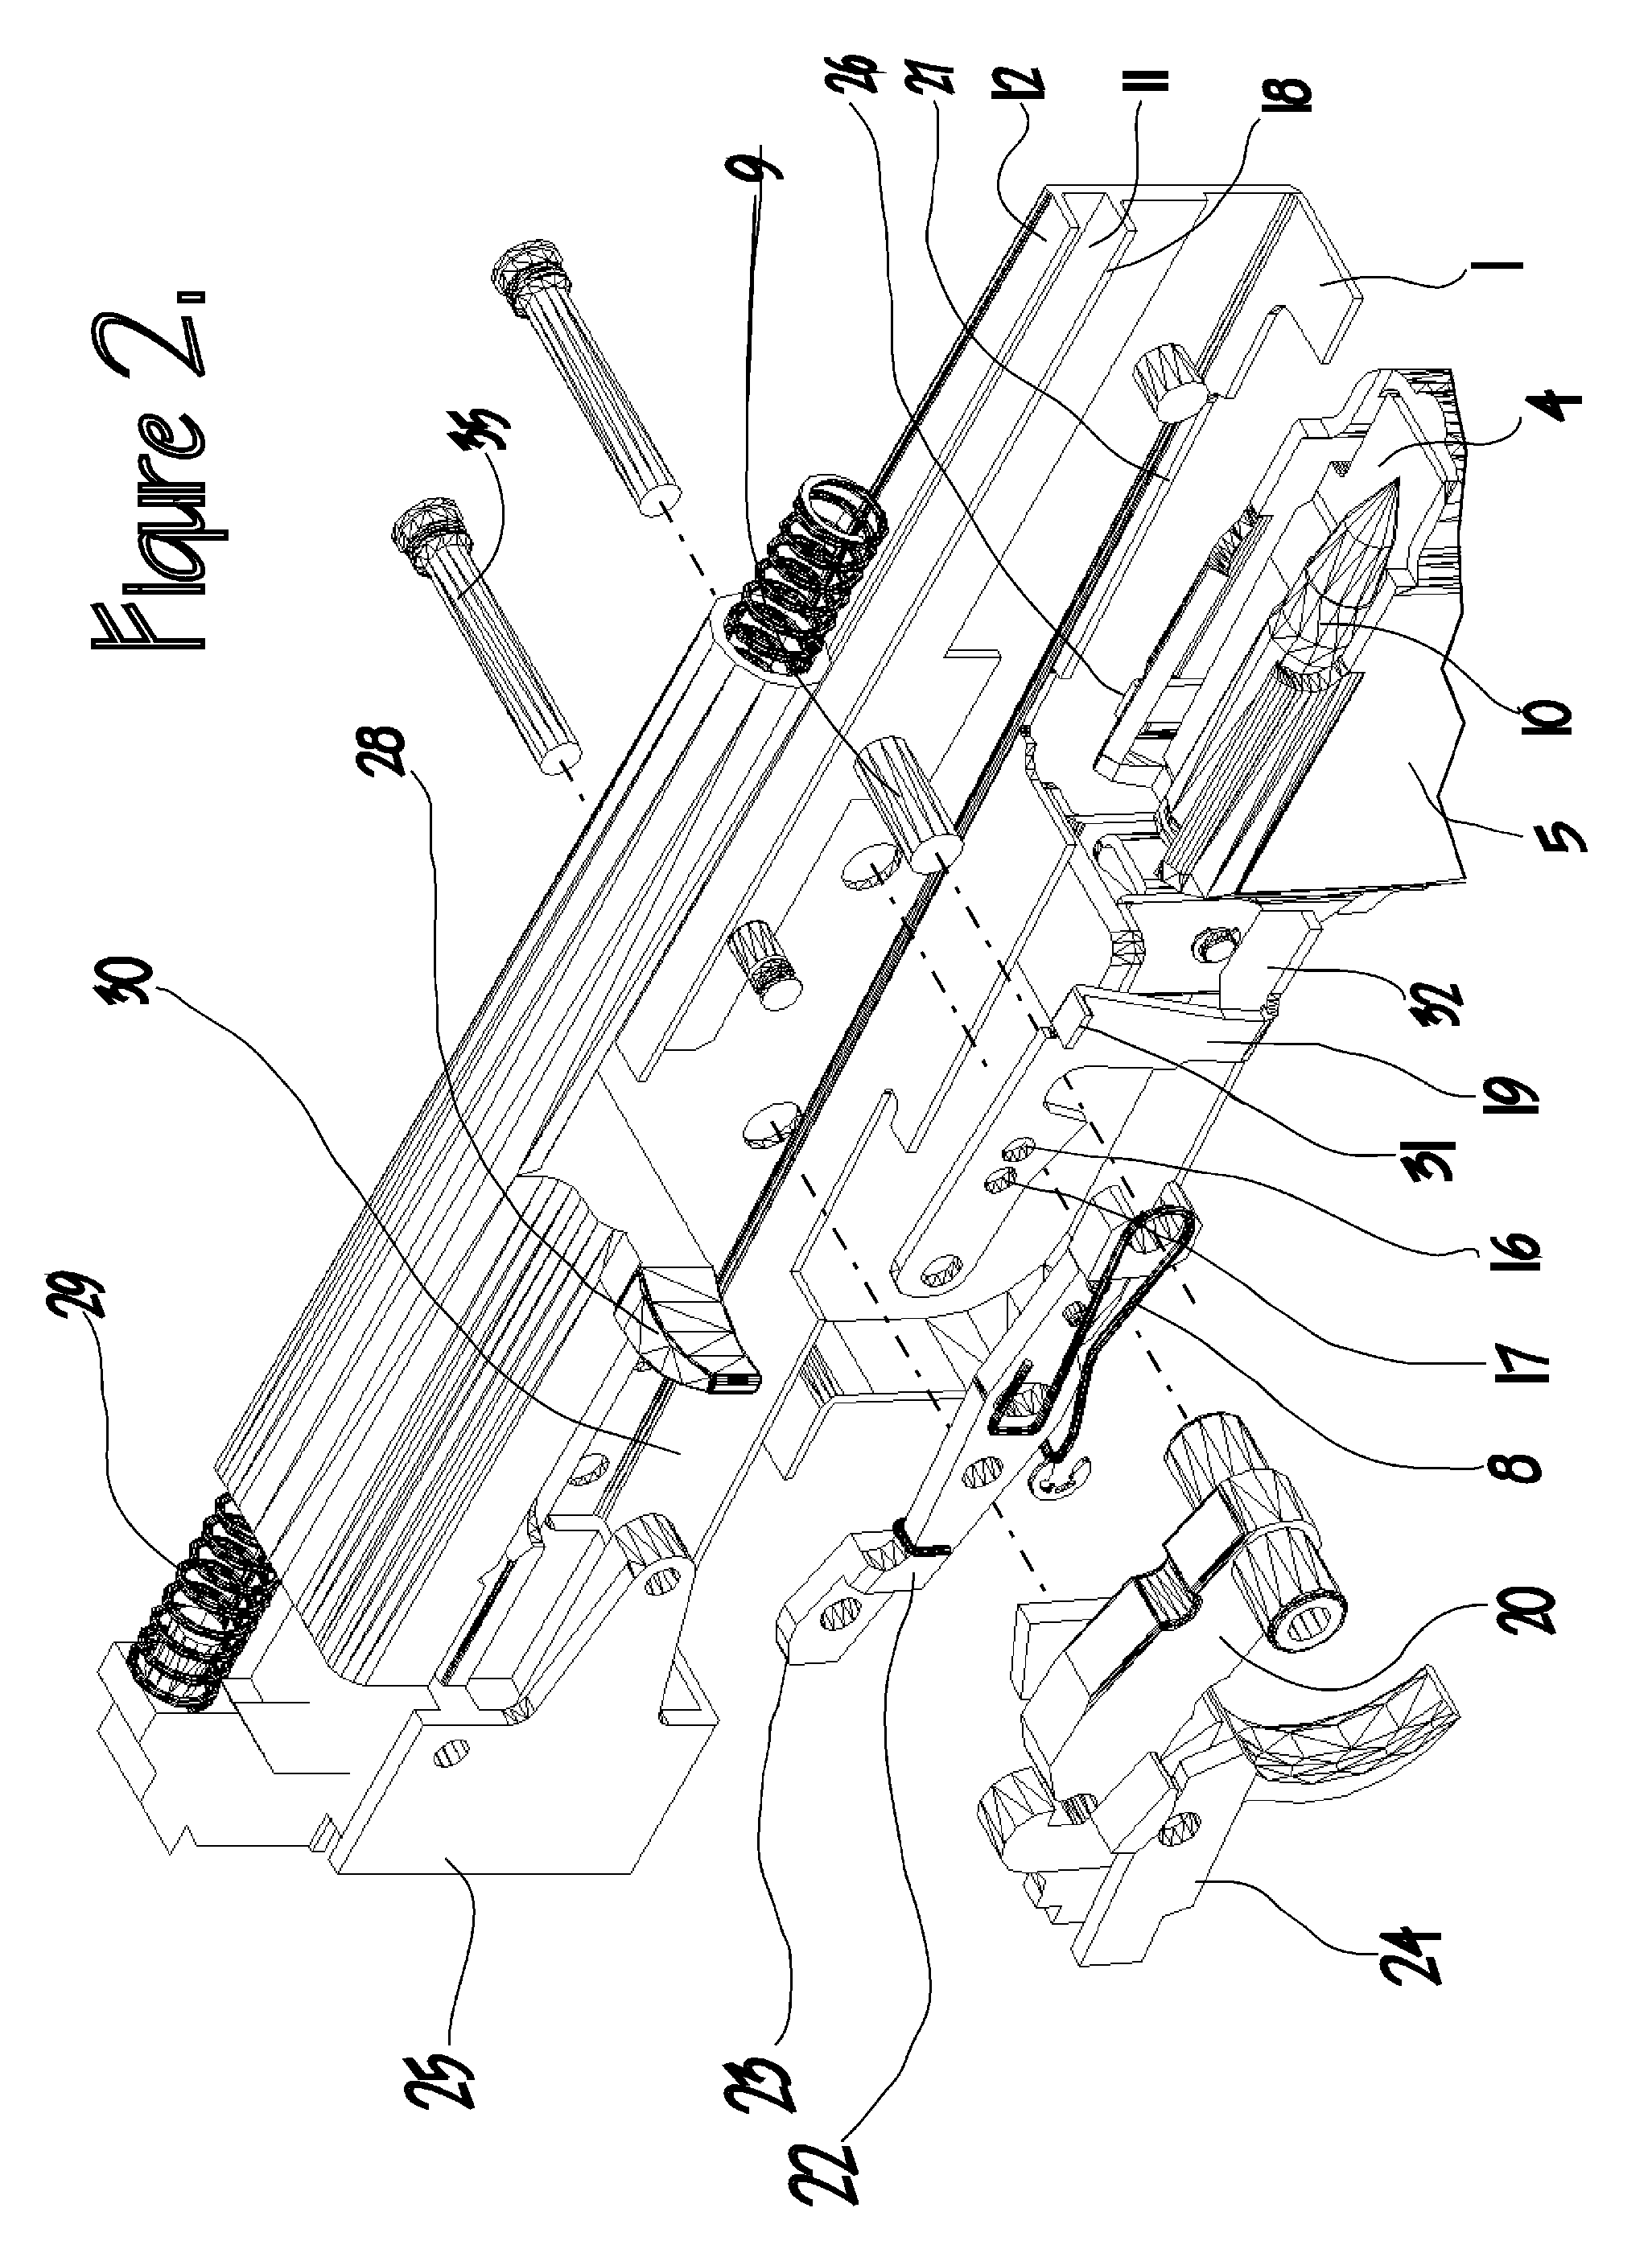 Apparatus and method for preventing the bolt carrier of a firearm from moving forward after firing the last round of ammunition, and signaling when the firearm has run out of ammunition.